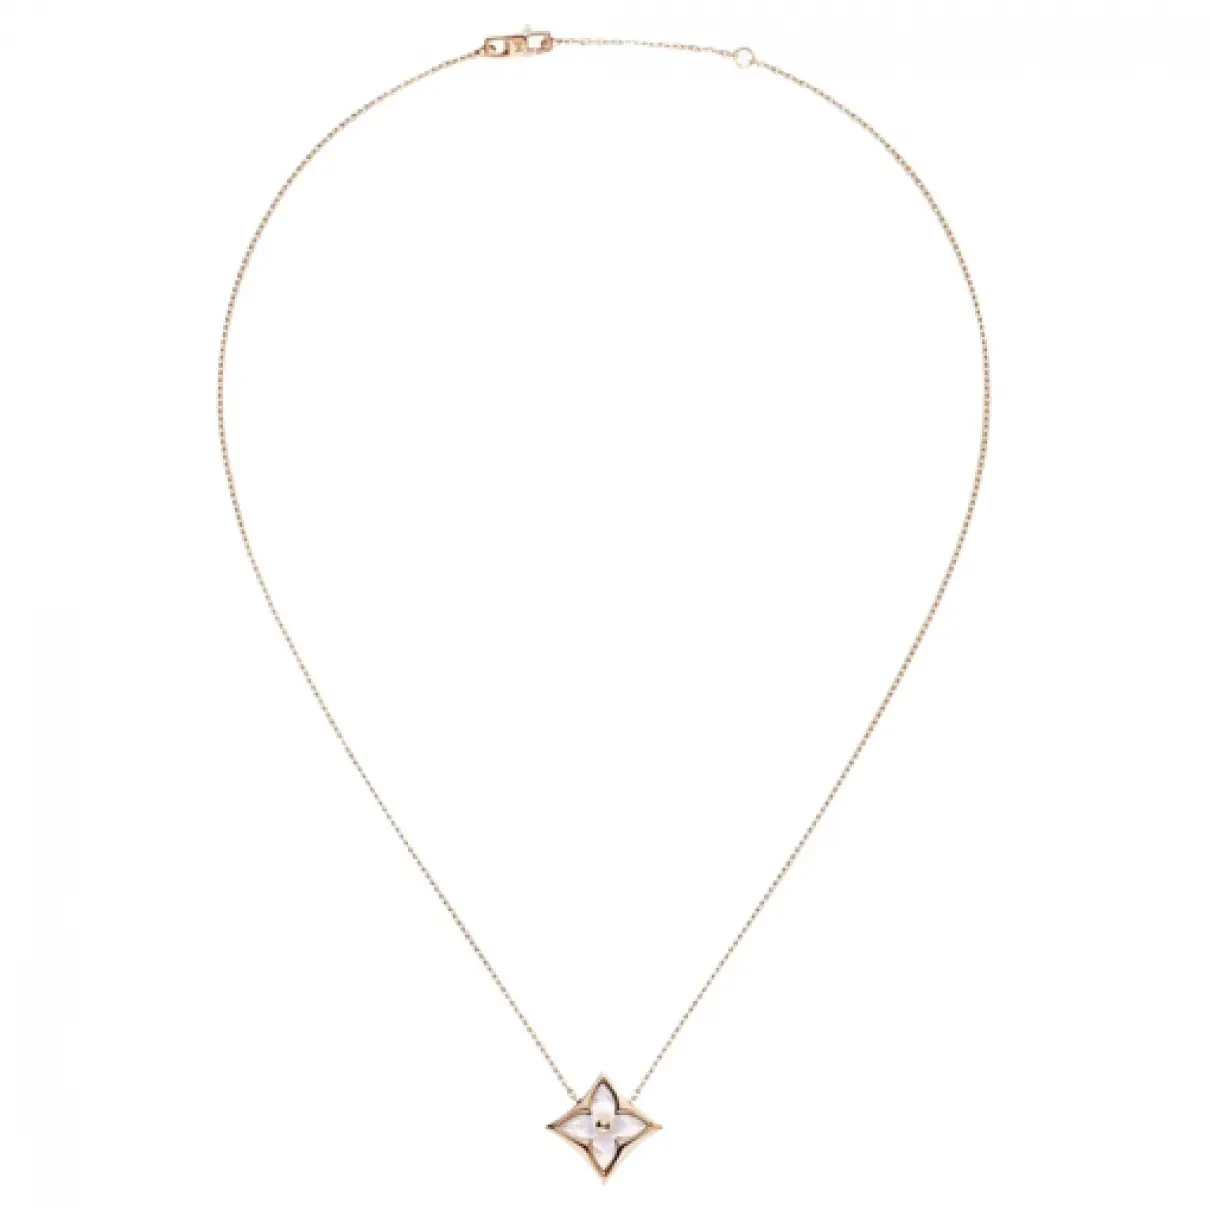 Blossom pink gold necklace